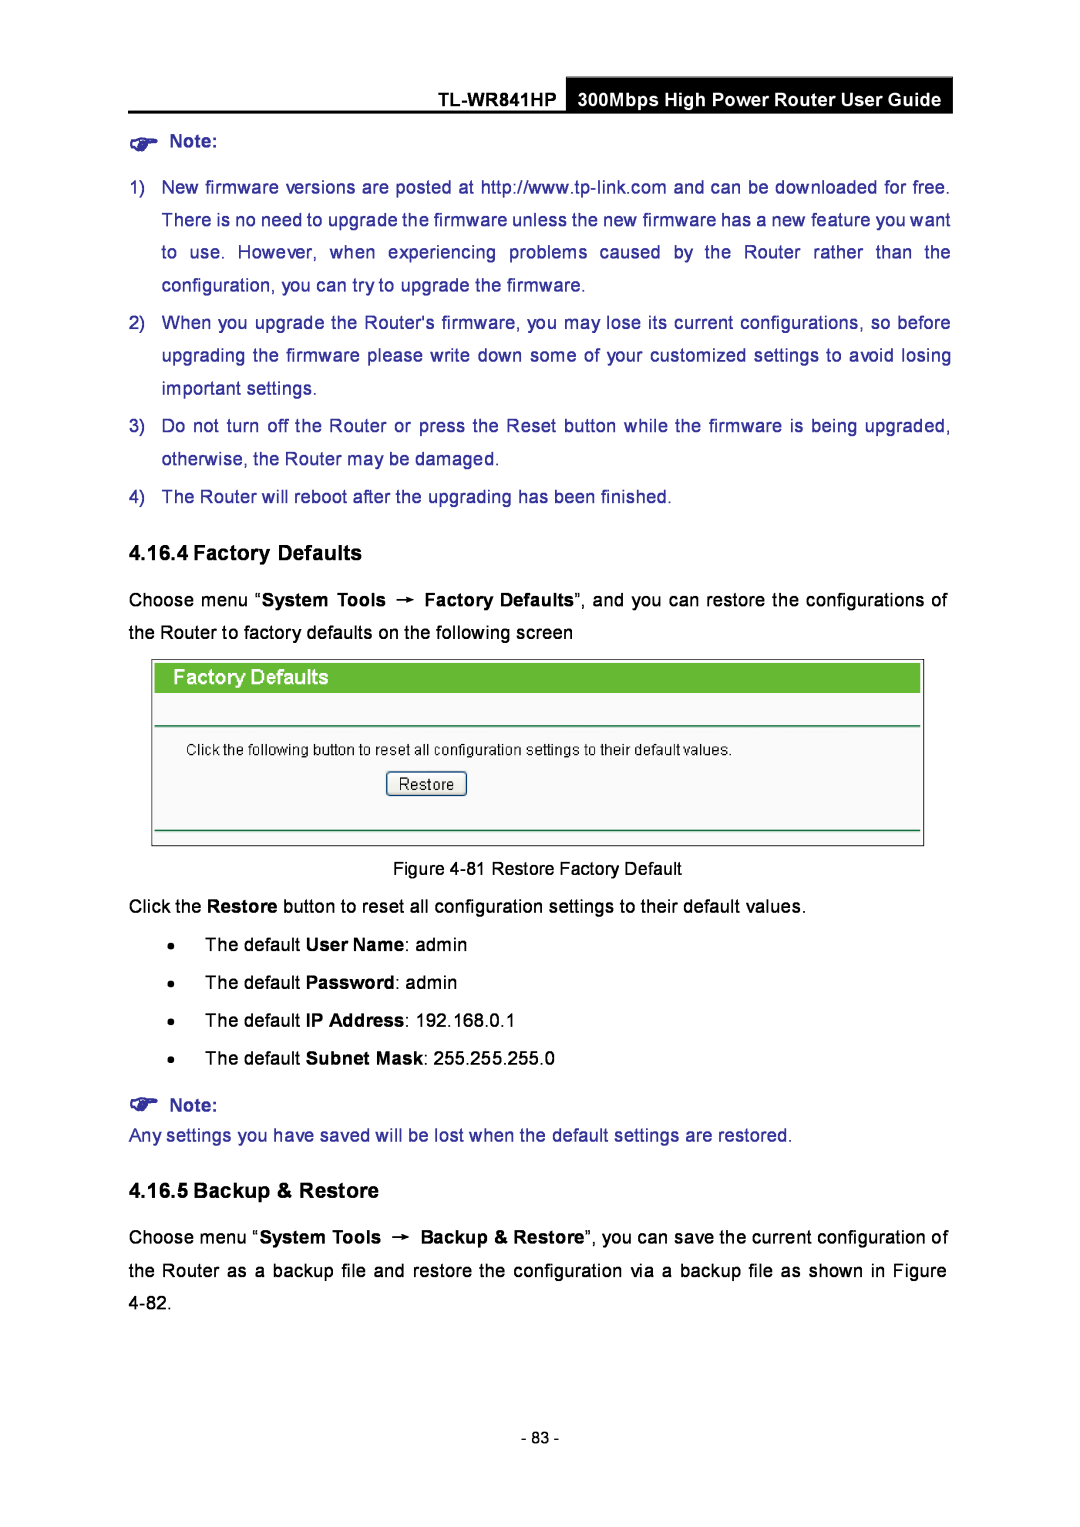 TP-Link Rev 1.0.0 1910010810 Factory Defaults, Backup & Restore, TL-WR841HP 300Mbps High Power Router User Guide,  Note 